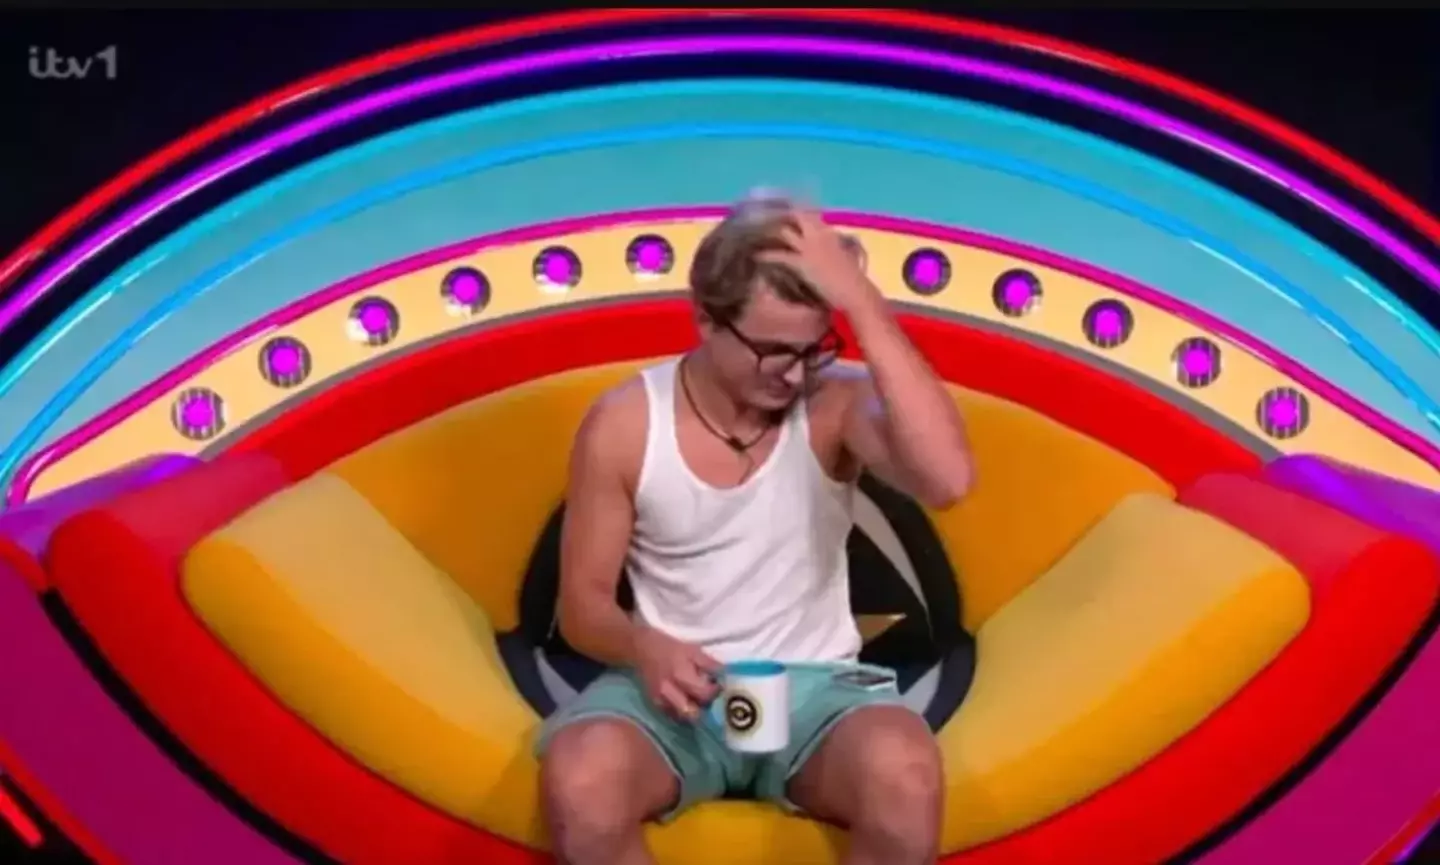 Celebrity big brother viewers wrongly thought Nikita Kuzmin was breaking a rule.